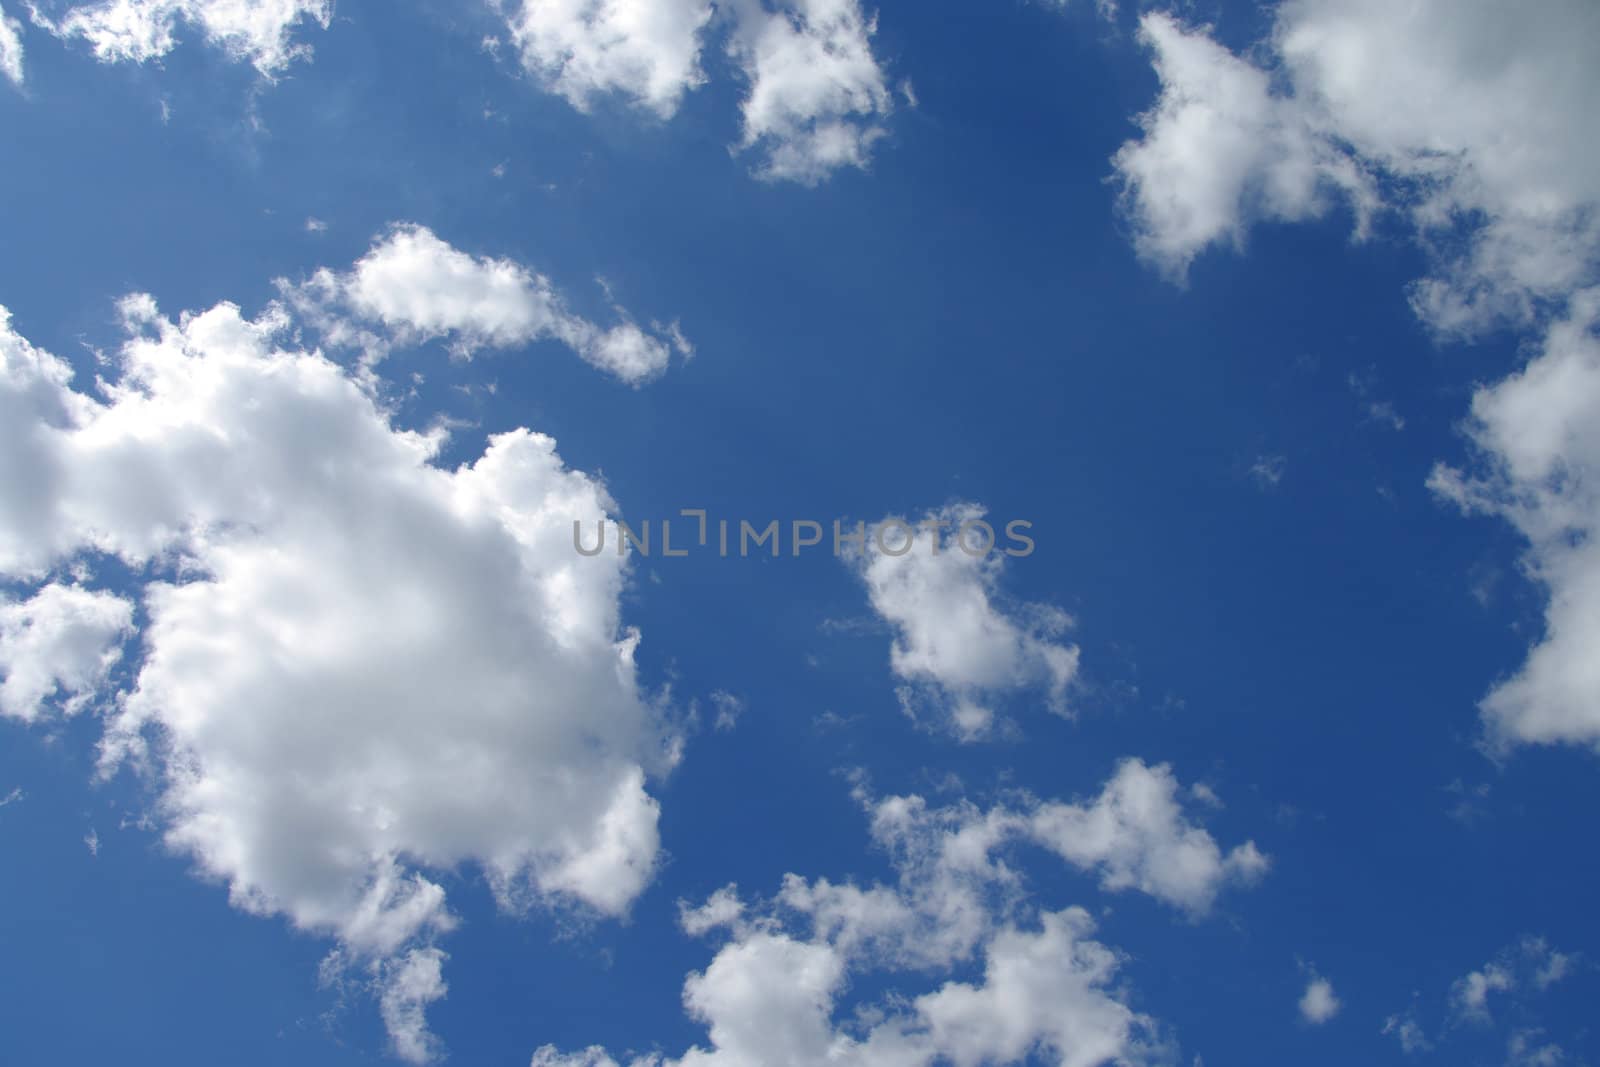 Clouds in a blue sky on a bright sunny day